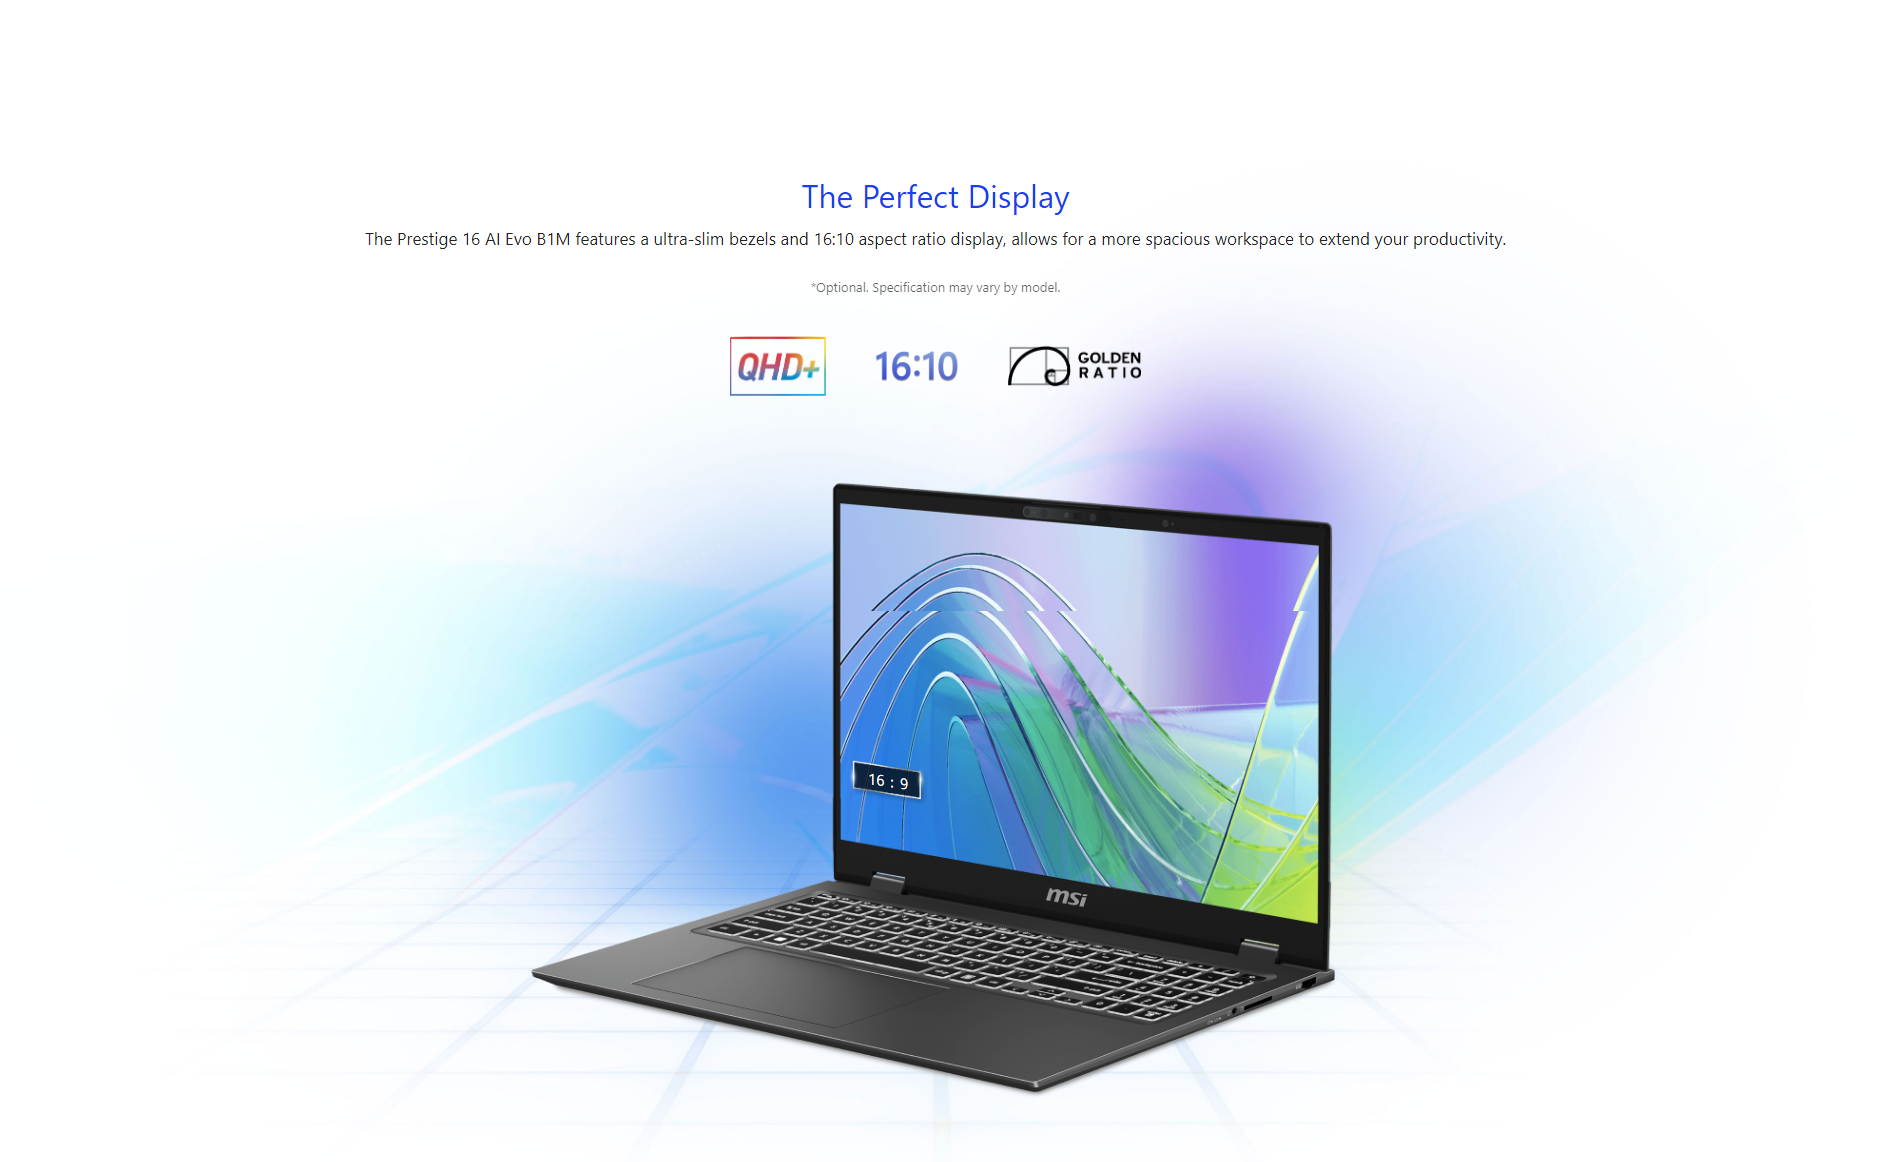 A large marketing image providing additional information about the product MSI Prestige 16 AI Evo (B1M) - 16" Core Ultra 7, 16GB/2TB - Win 11 Notebook - Additional alt info not provided